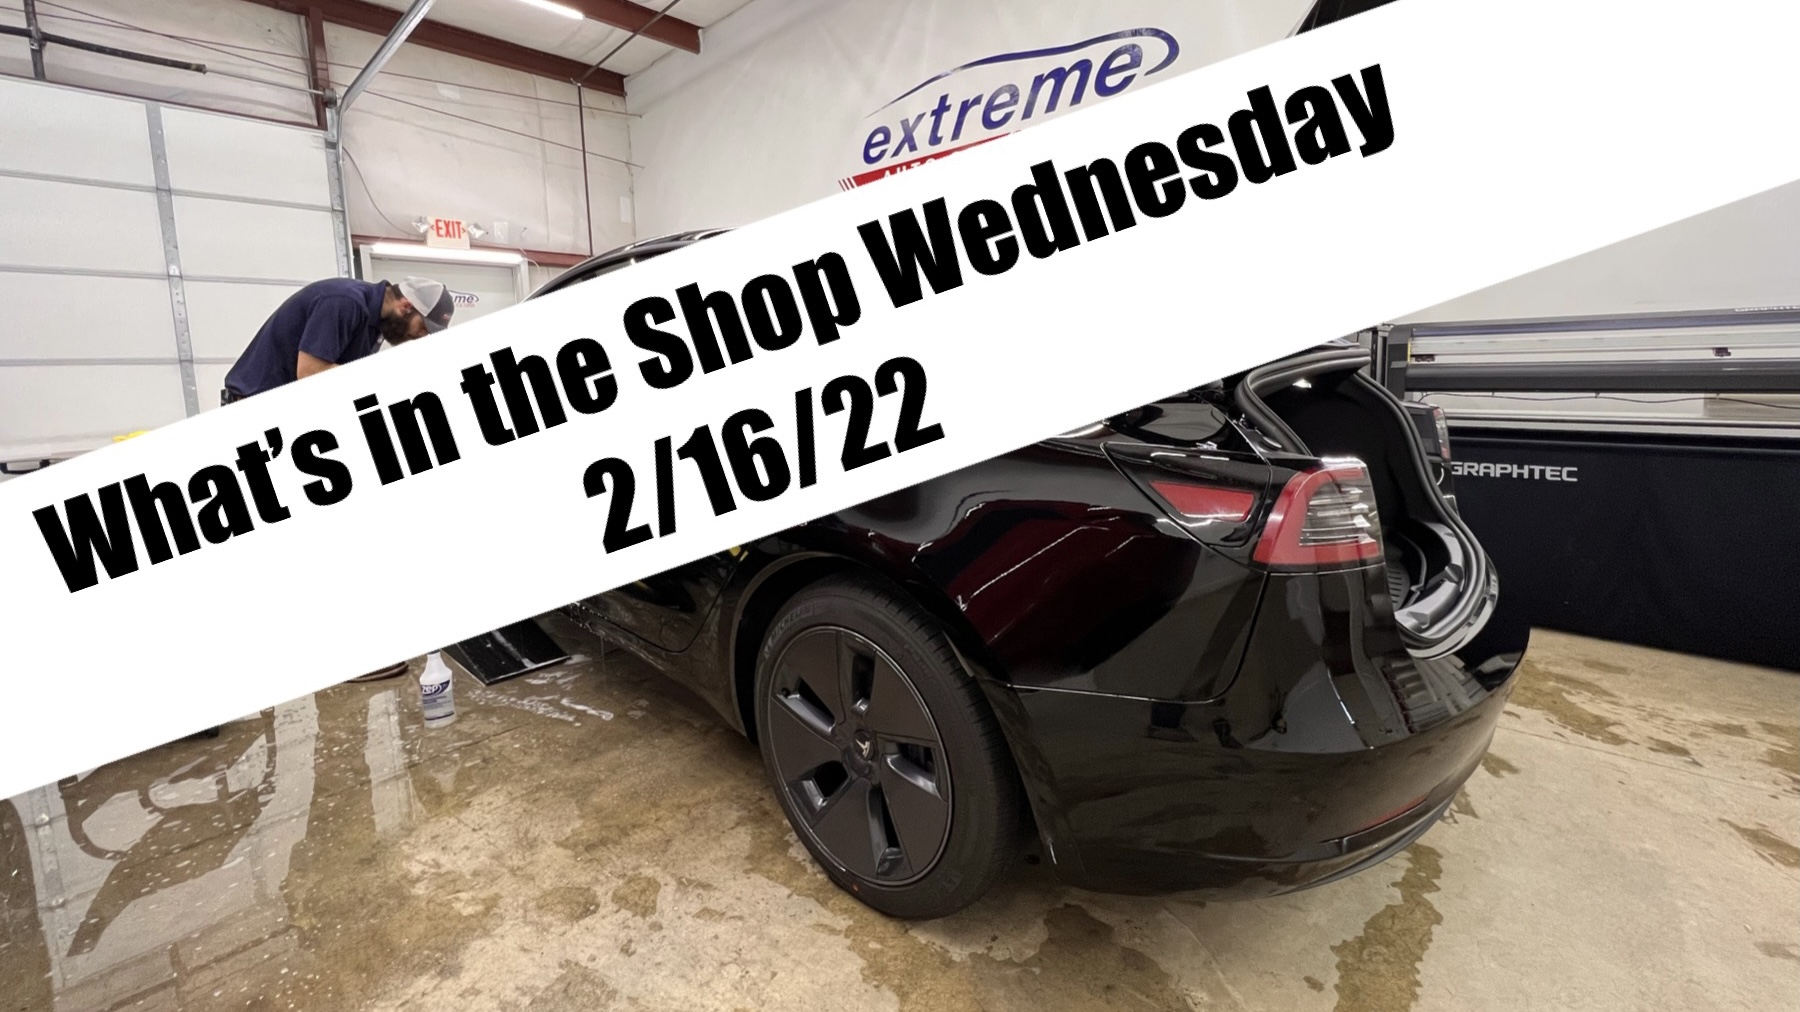 What’s in the Shop Wednesday 2/16/22